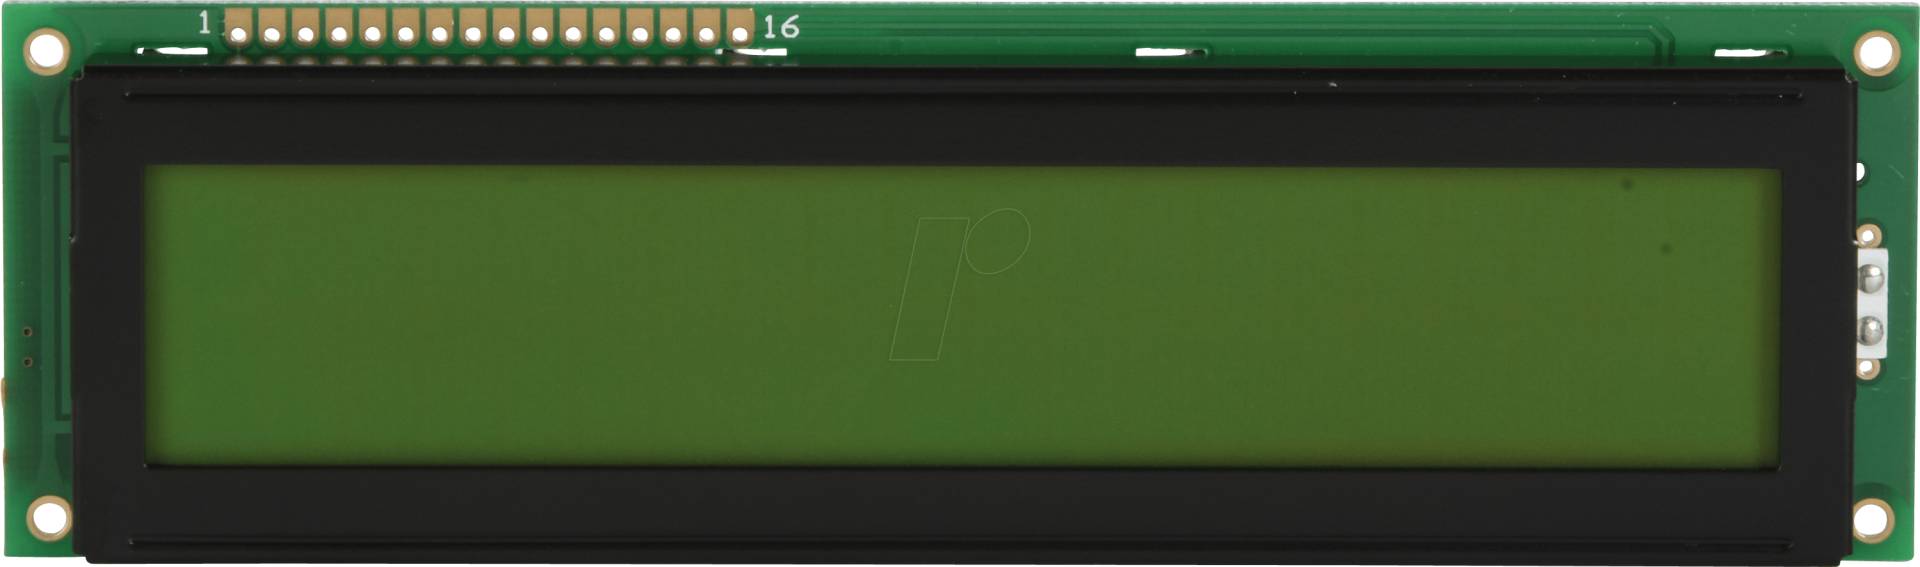 LCD-PM 2X20-9 A - LCD-Modul, 2x20, 146x43x13,7mm, ge/gn, m.Bel. von DISPLAY VISIONS